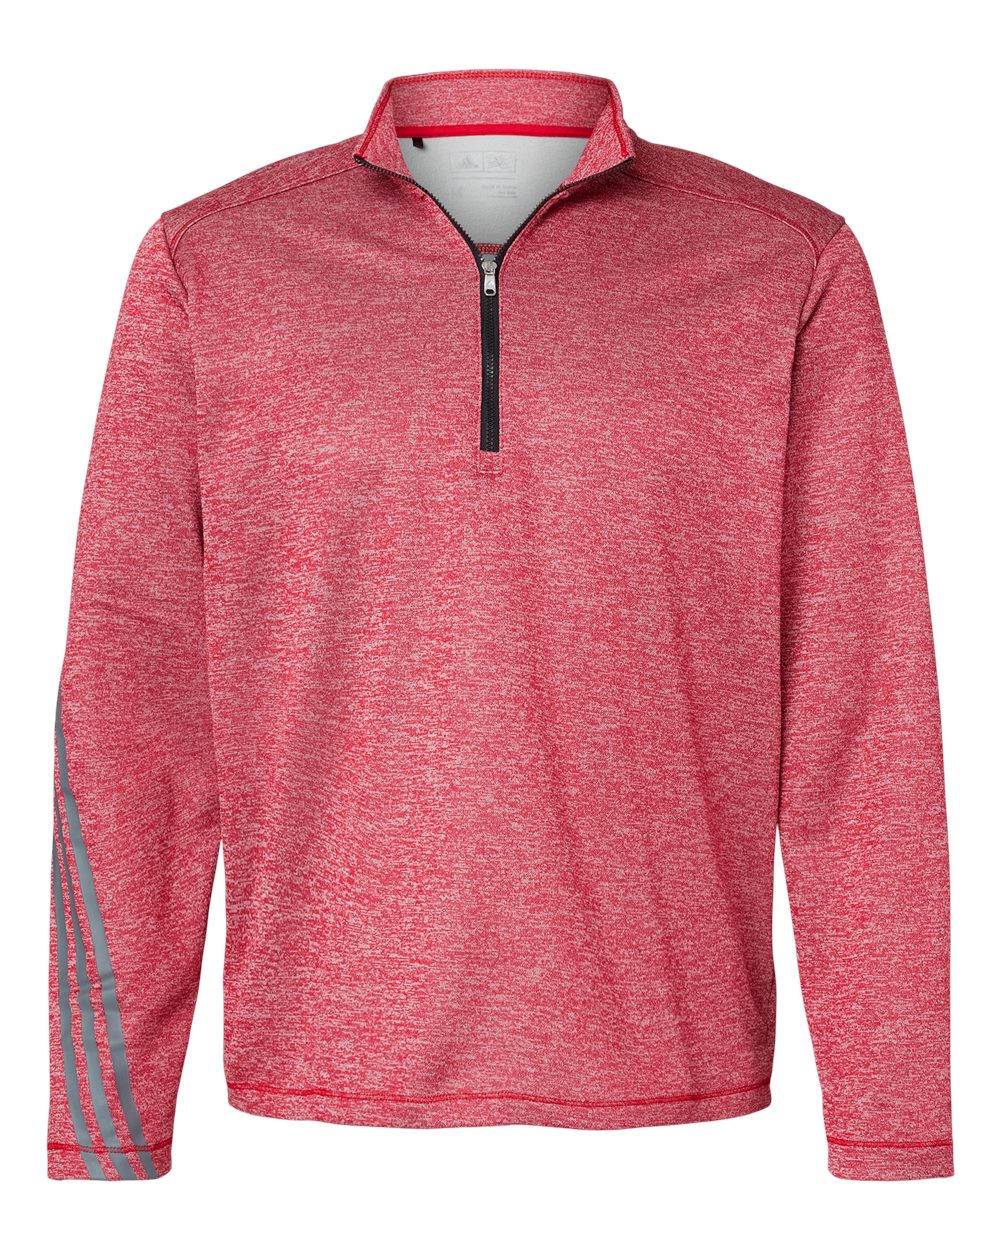 Adidas - Brushed Terry Heathered Quarter-Zip Pullover - A284